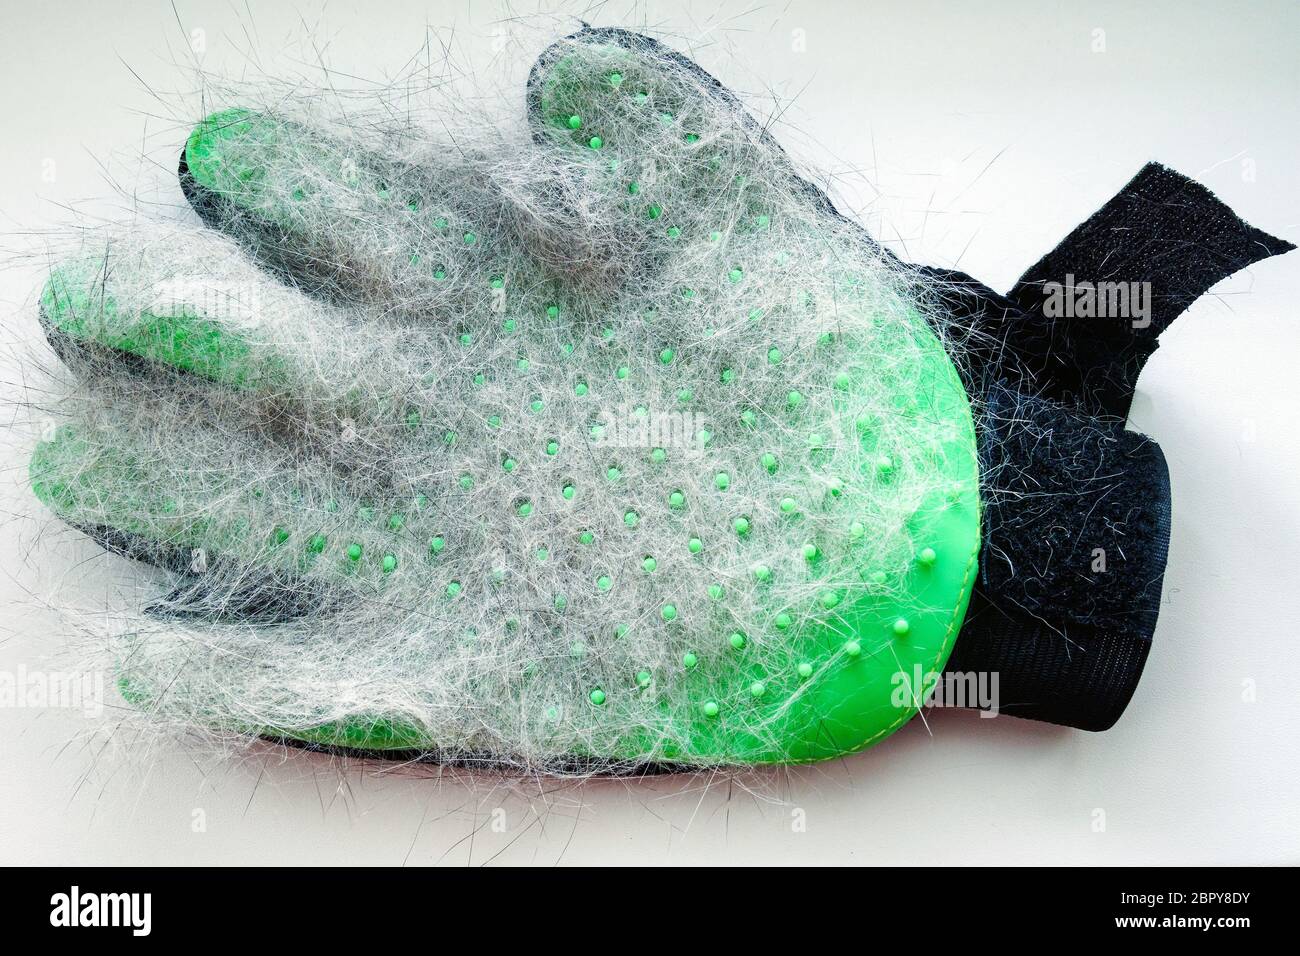 white and gray hair of cat on green glove after grooming on white background Stock Photo